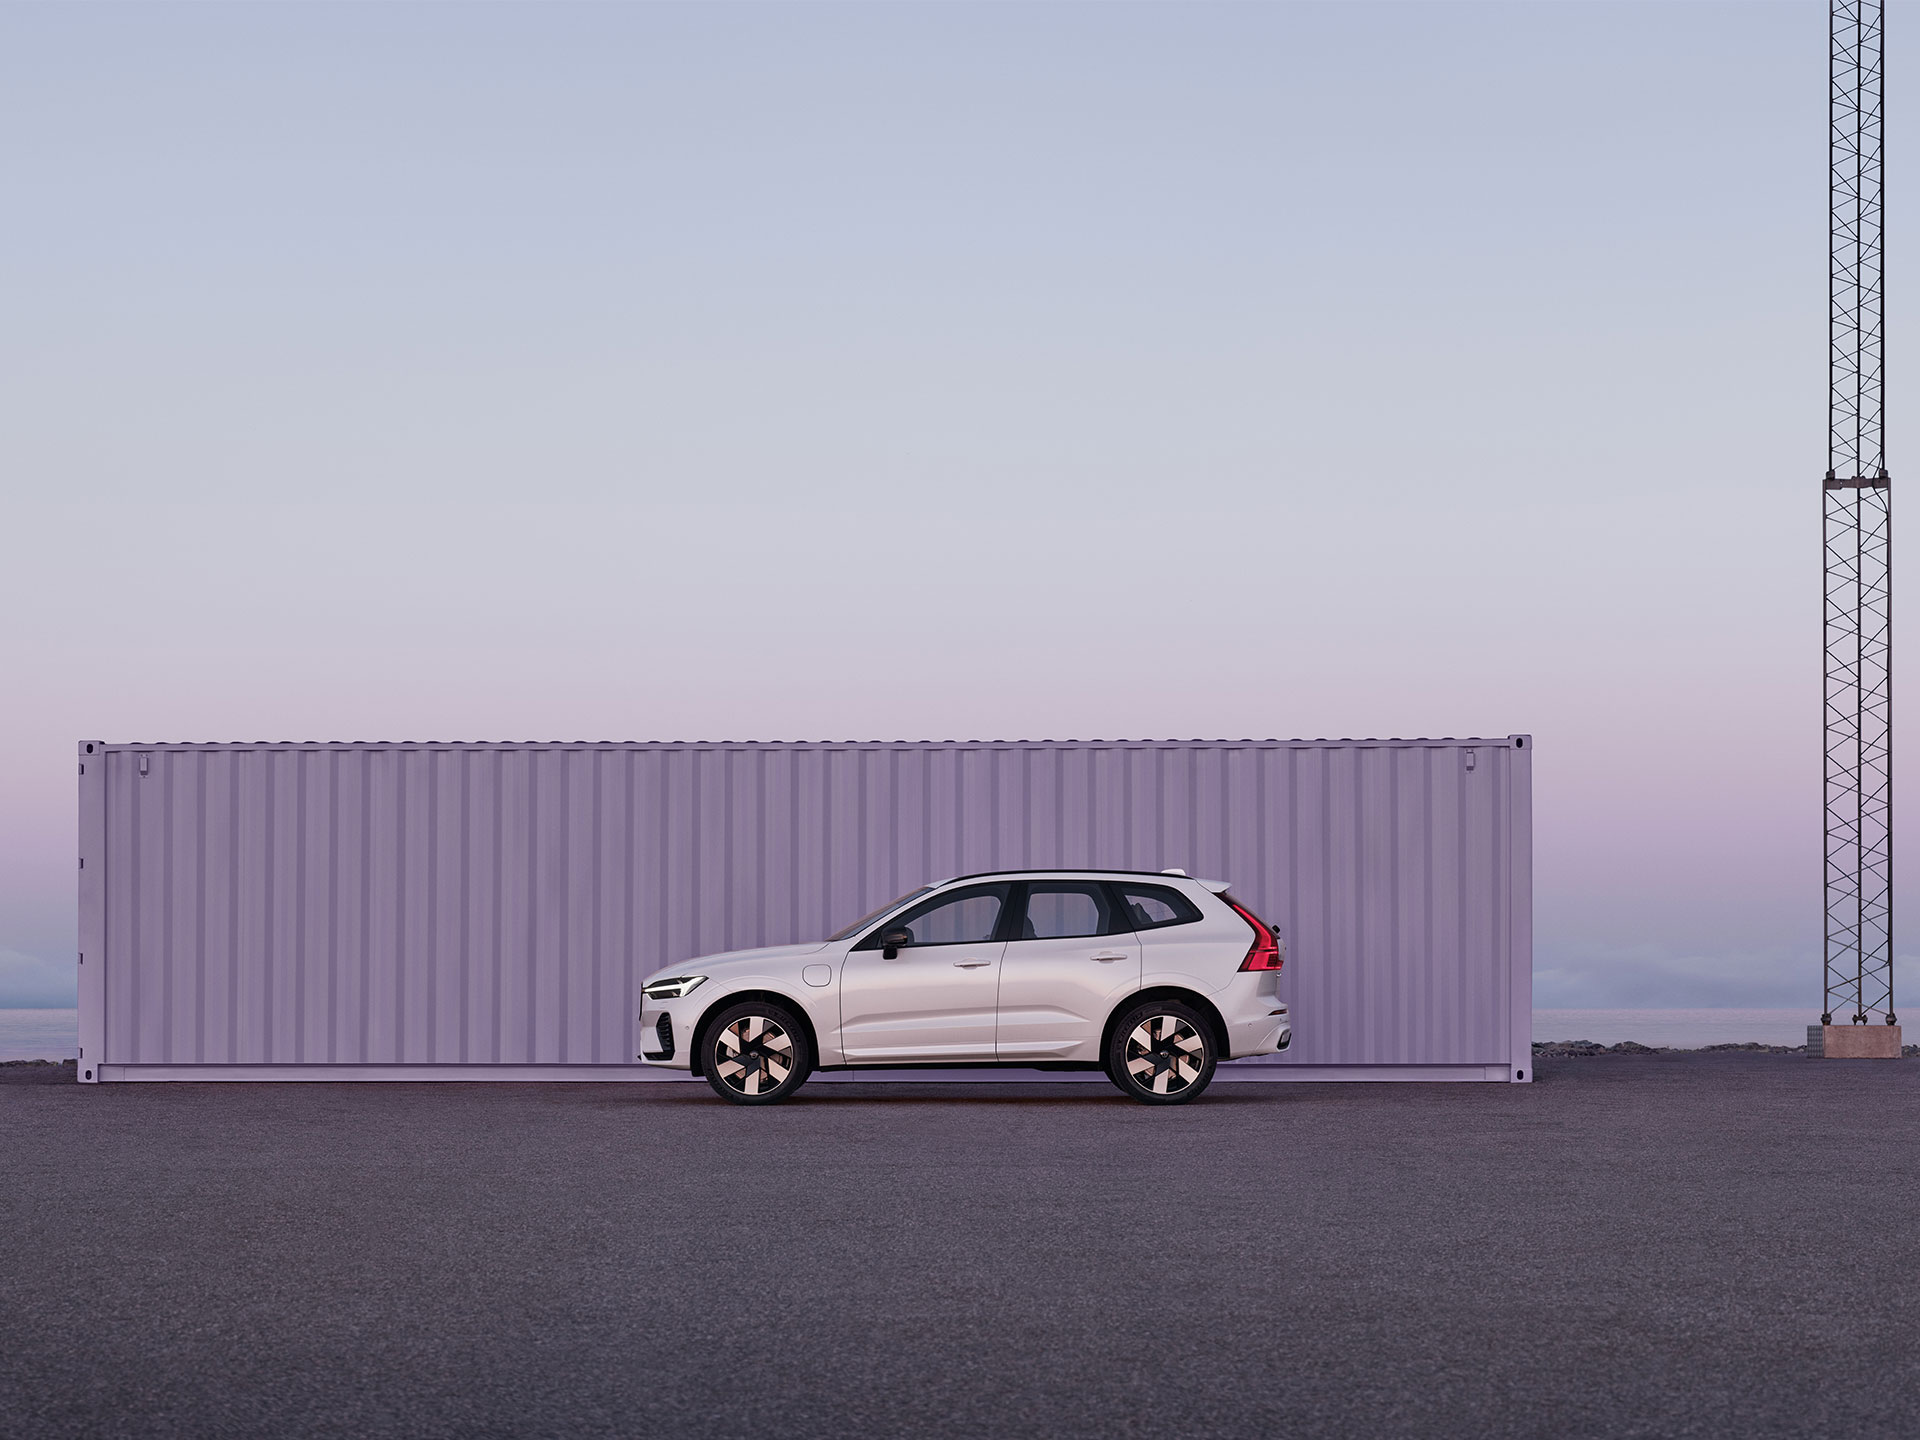 A Volvo XC60 parked in a spare, industrial setting in the purple and pink light of a colourful sunrise.  